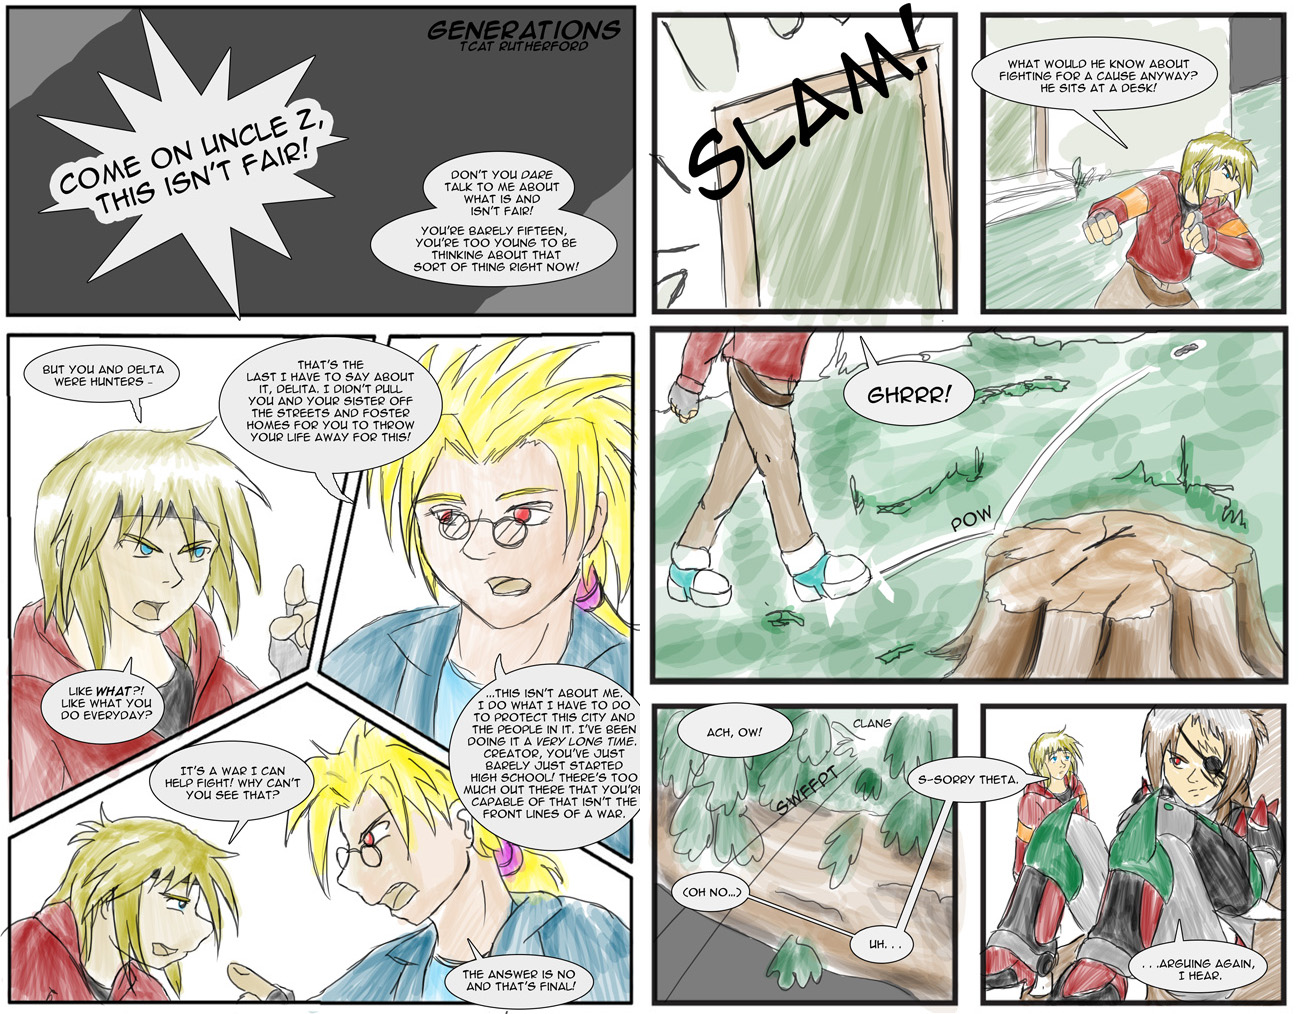 Comic - Generations Page 1 and 2